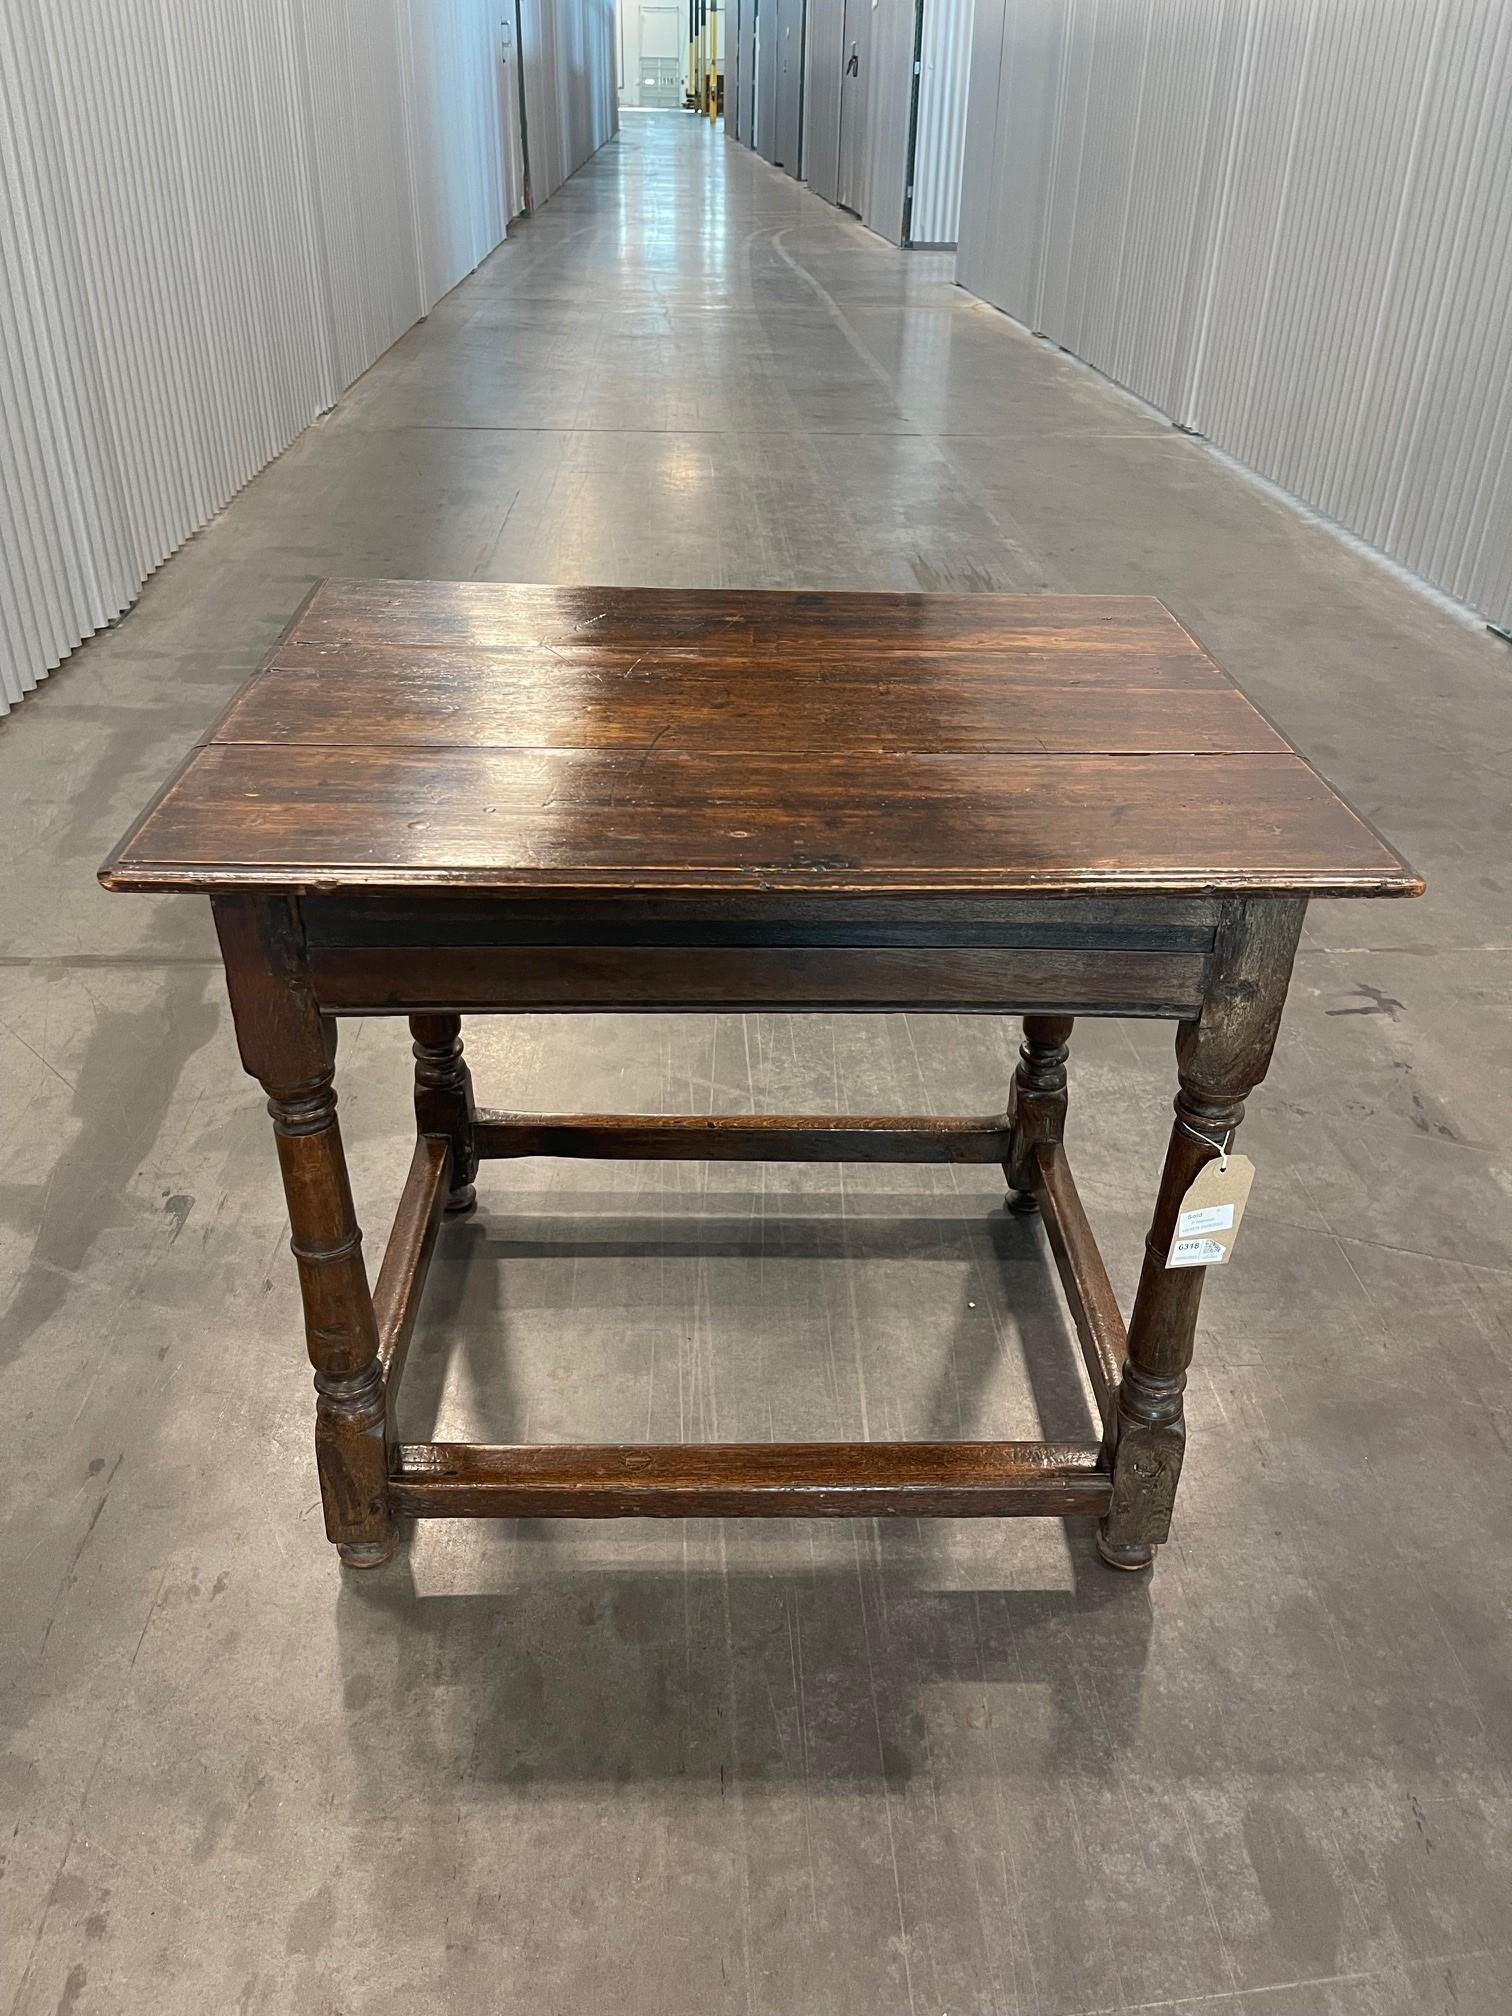 A wonderful Charles II early country oak stretcher table Circa 1680, pegged and molded rectangular three plank top, the rails with sunken fillet moldings', all on turned supports with a ring and united by plain pegged stretchers. The  oak coloring